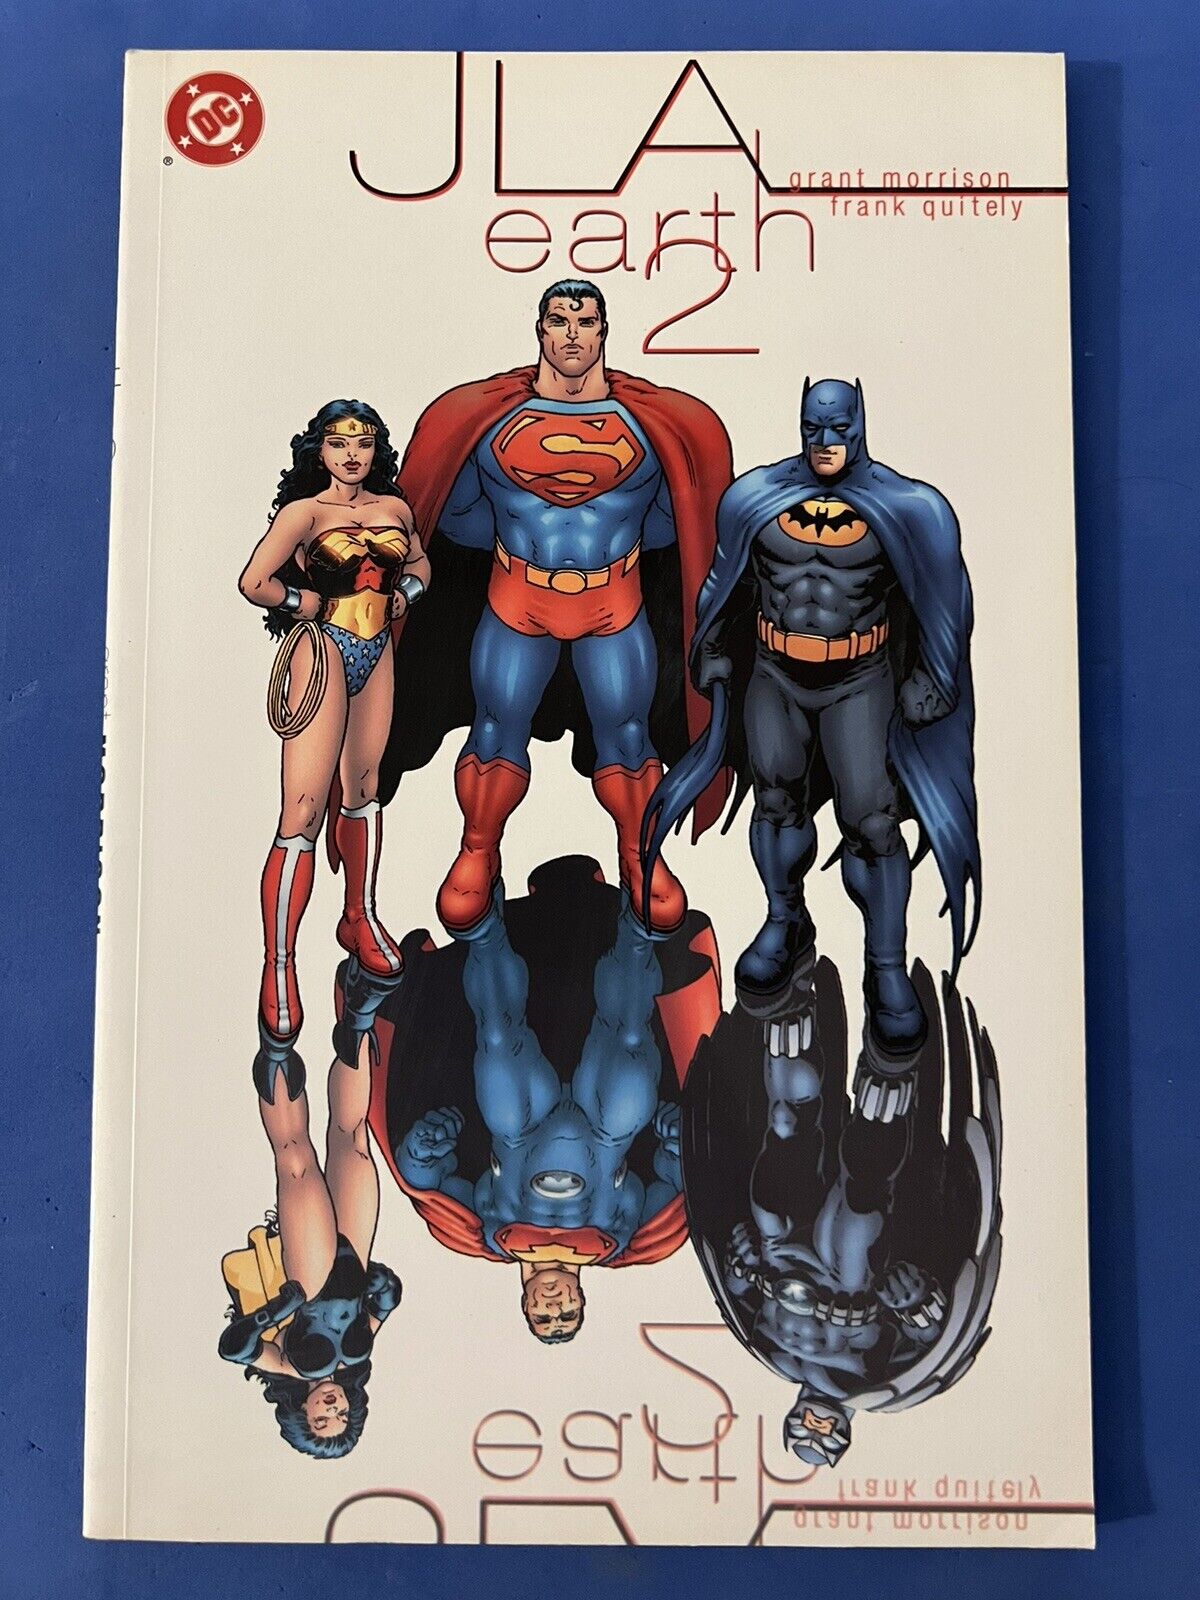 JLA - Earth 2 by Grant Morrison 2000 Trade Paperback - Justice League Ex. Cond.